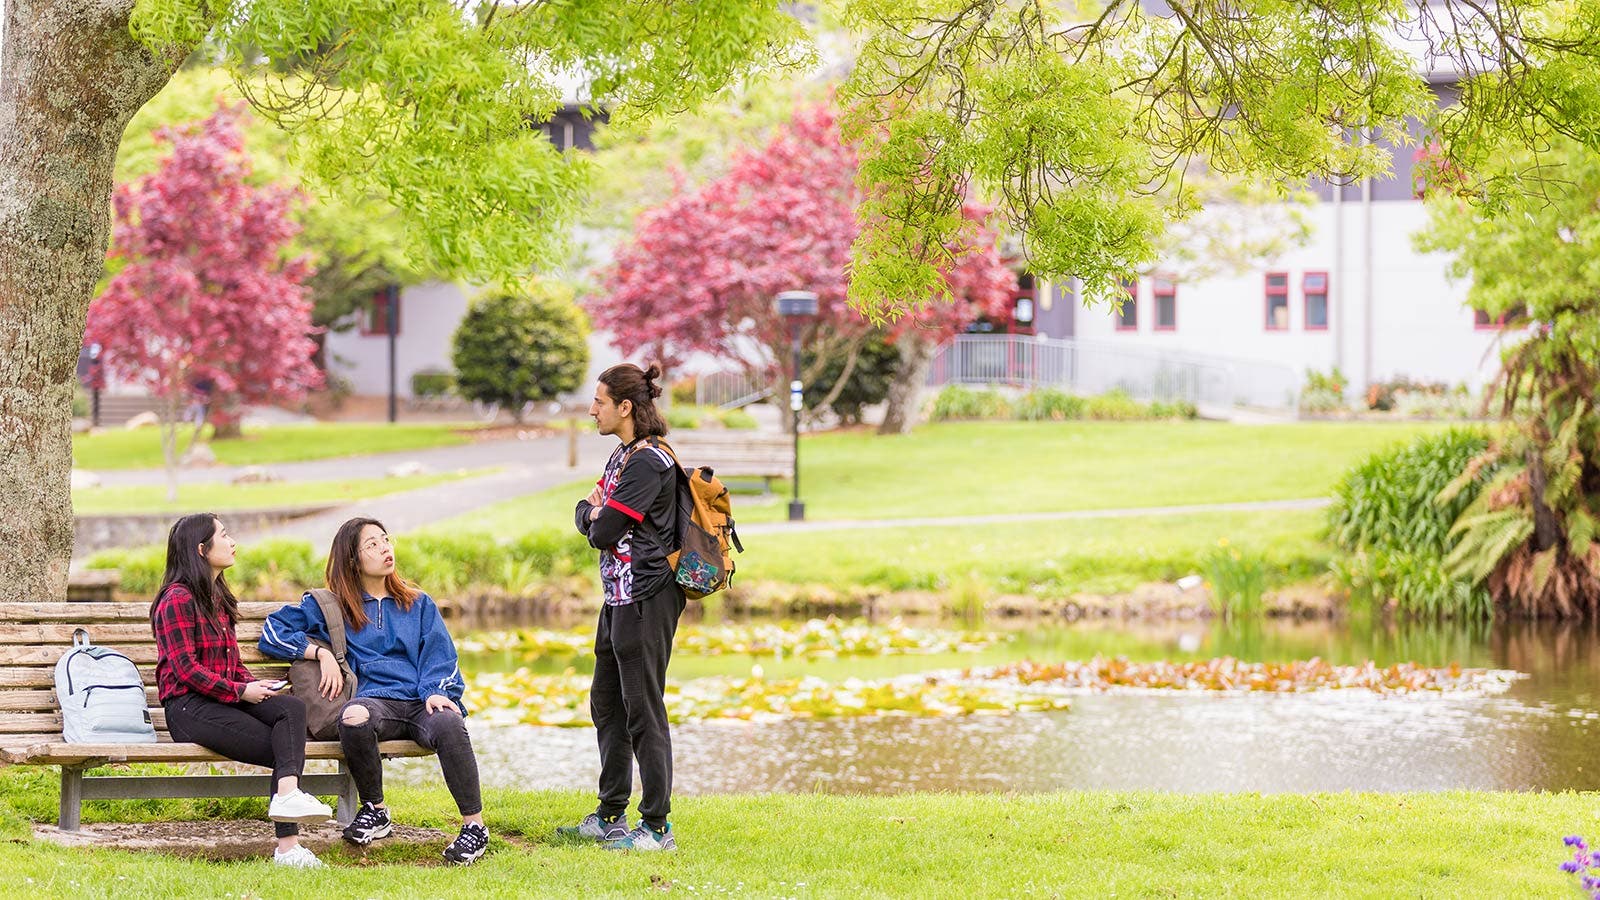 Students sitting and talking on bench by river 